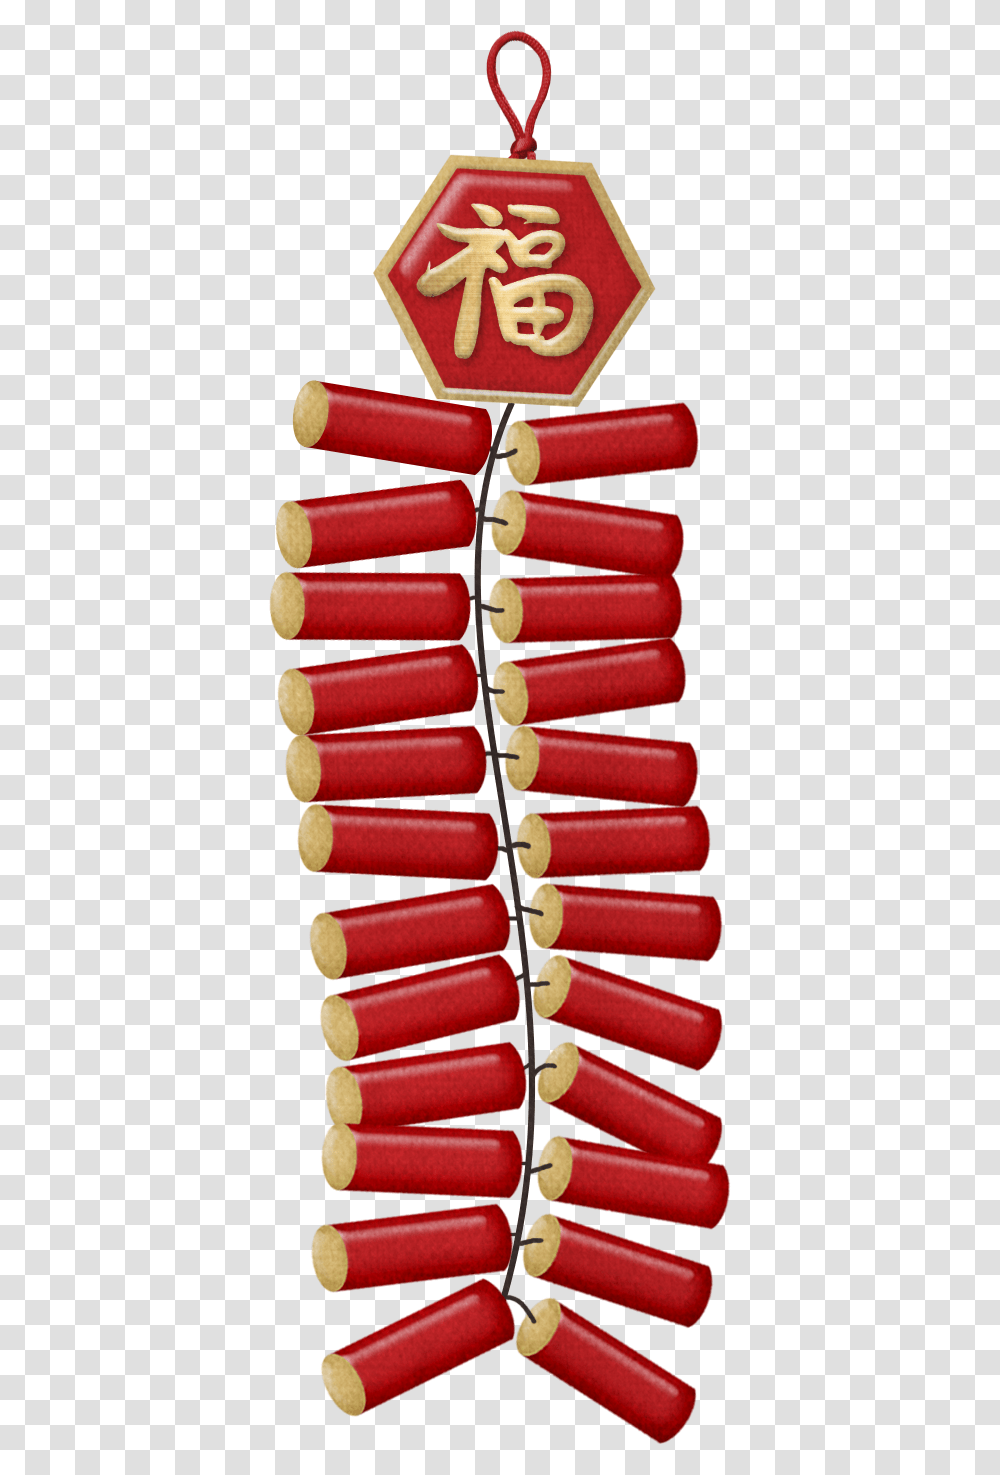 Firecracker Clipart Red Packet Chinese New Year Firecrackers Clipart, Leisure Activities, Weapon, Weaponry, Musical Instrument Transparent Png